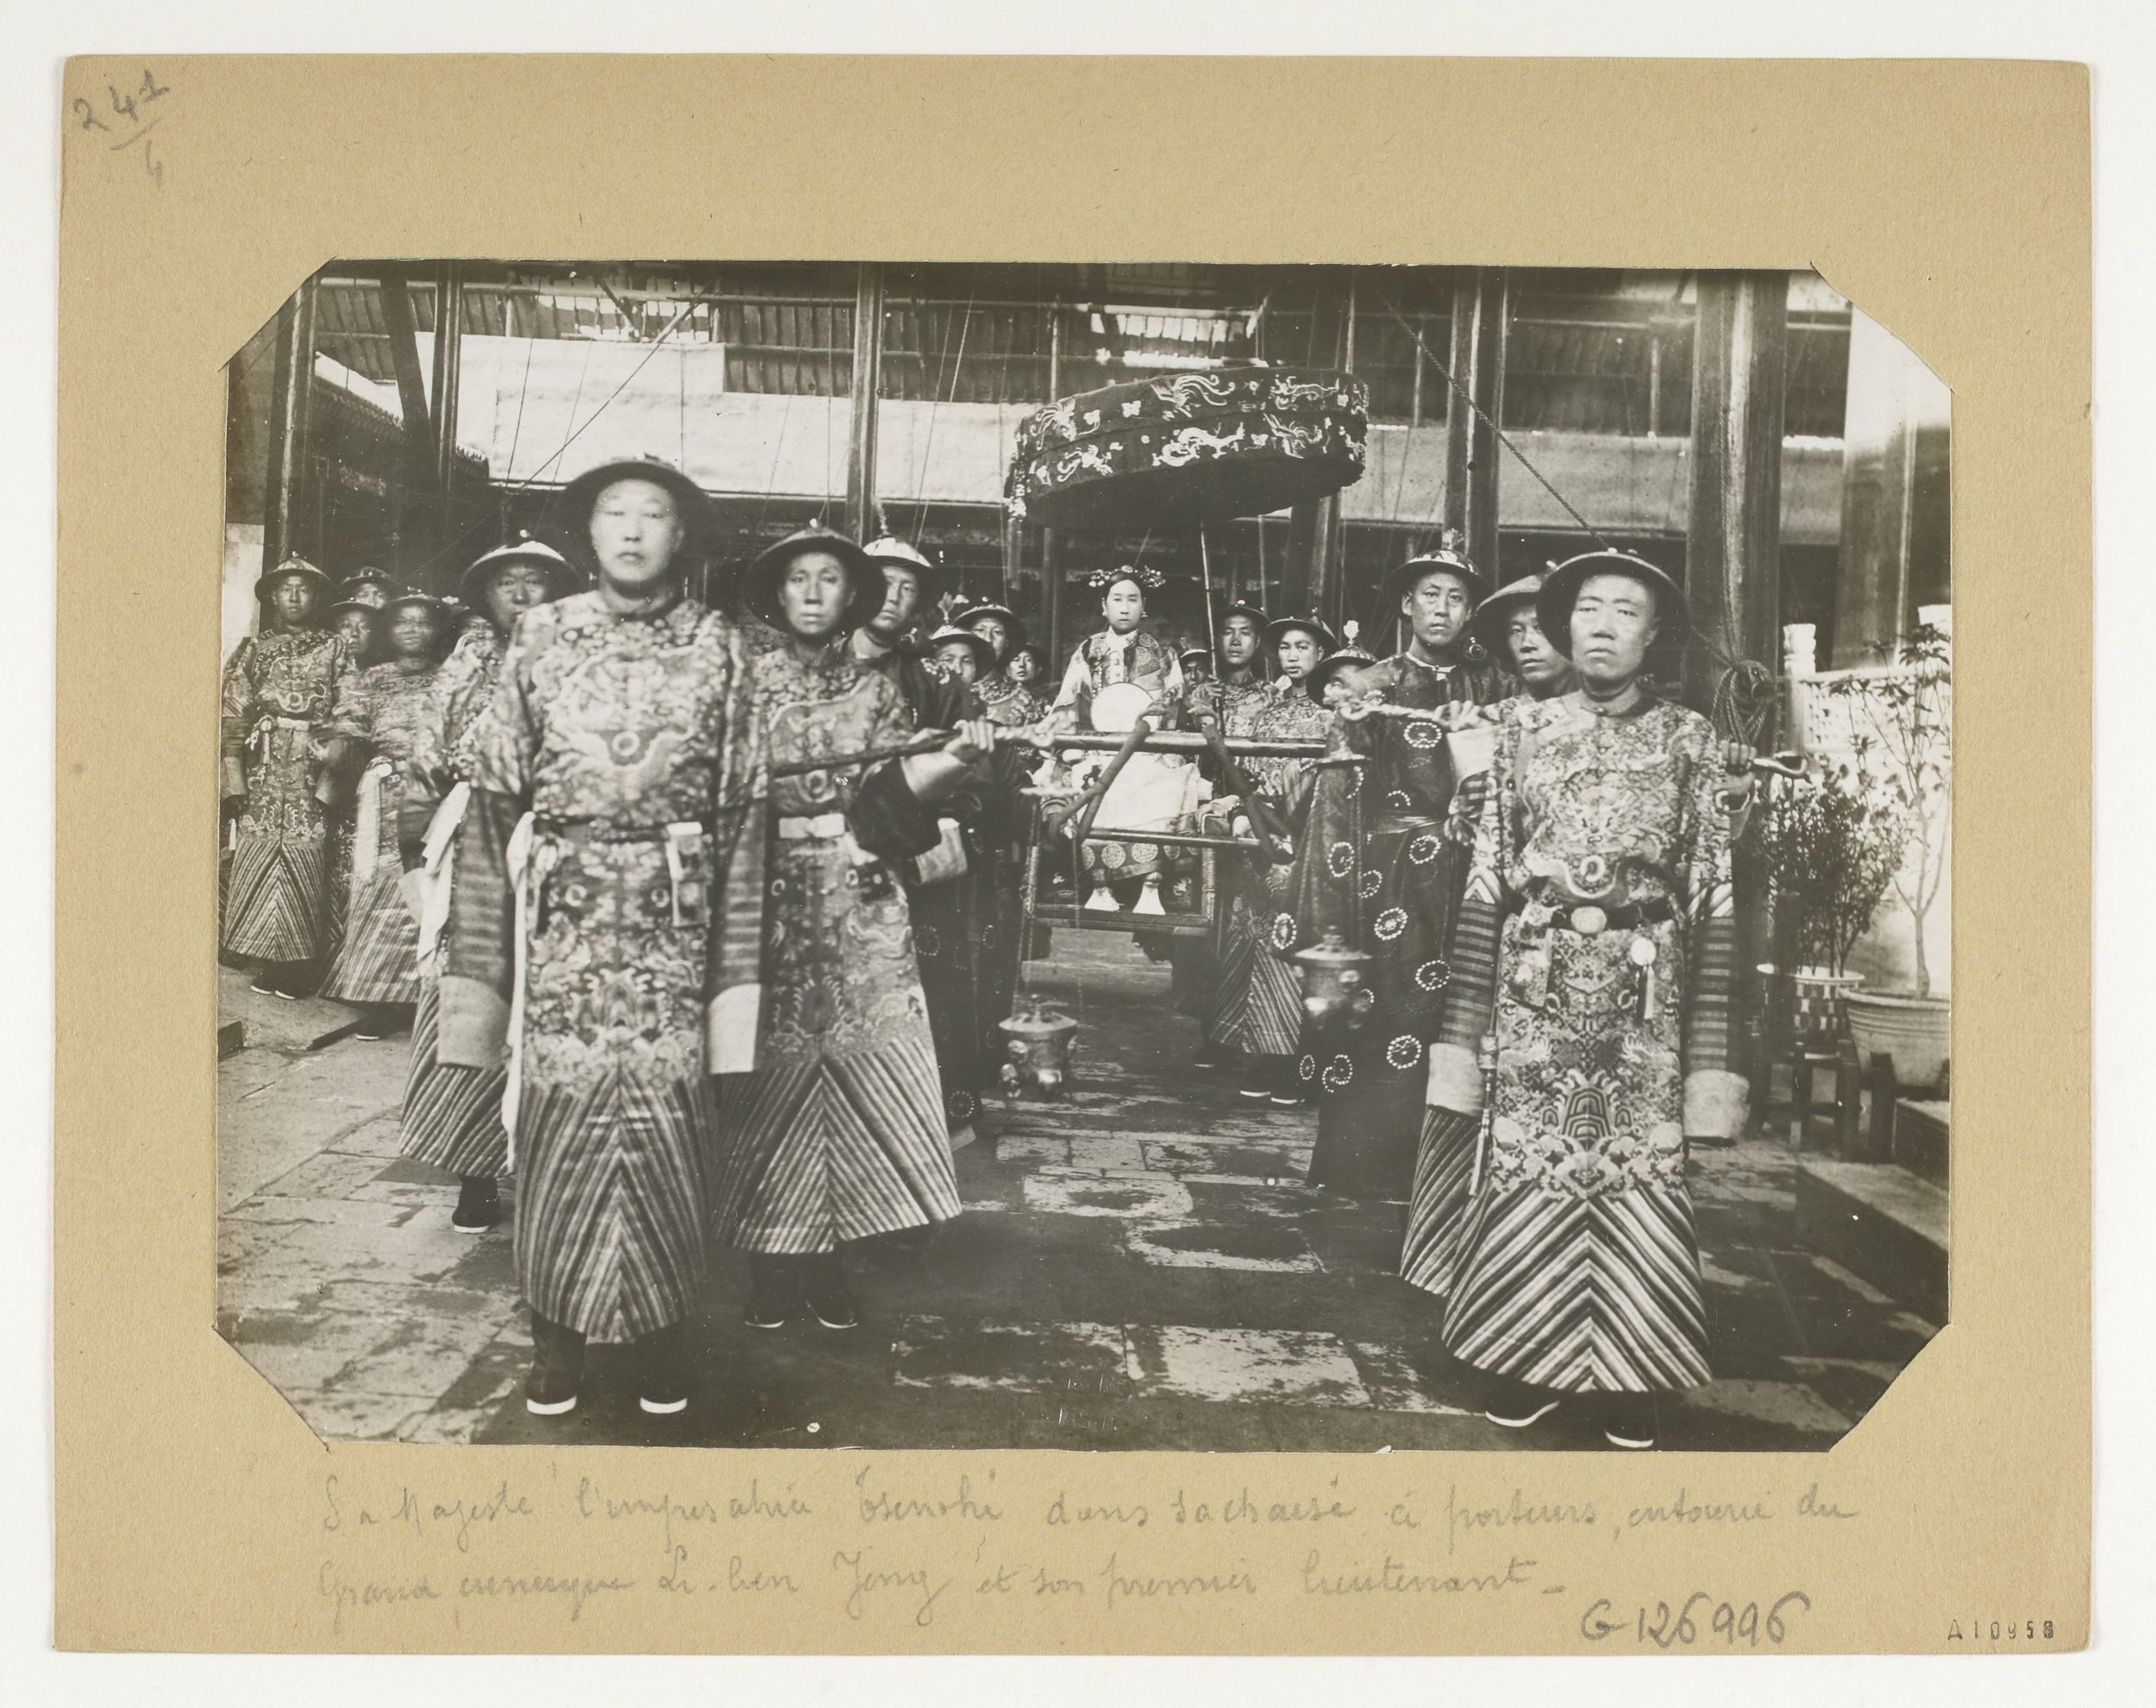 firmin laribe china 1904 1910 photography of china 10 - Firmin Laribe | Archive | Portrait | Black and white photography | Costumes | Architectural photography - Firmin Laribe